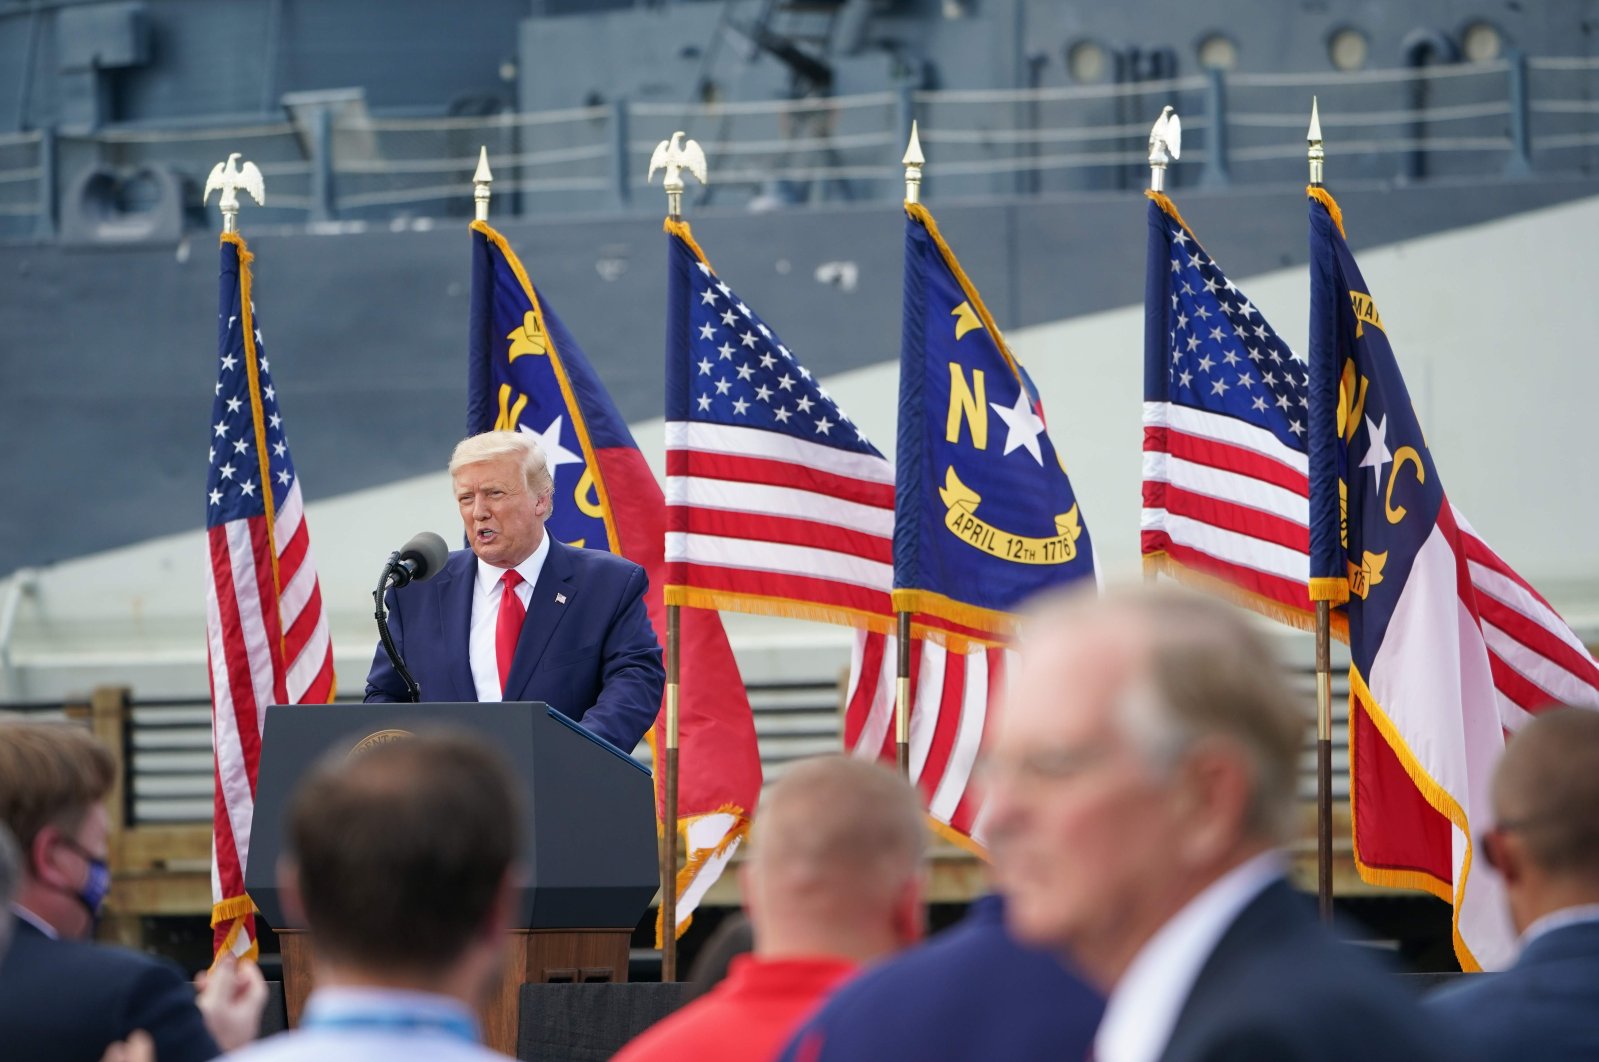 U.S. President Donald Trump speaks at the Battleship North Carolina in Wilmington, North Carolina on the 75th anniversary of the end of World War II, Sept. 2, 2020. (AFP Photo)